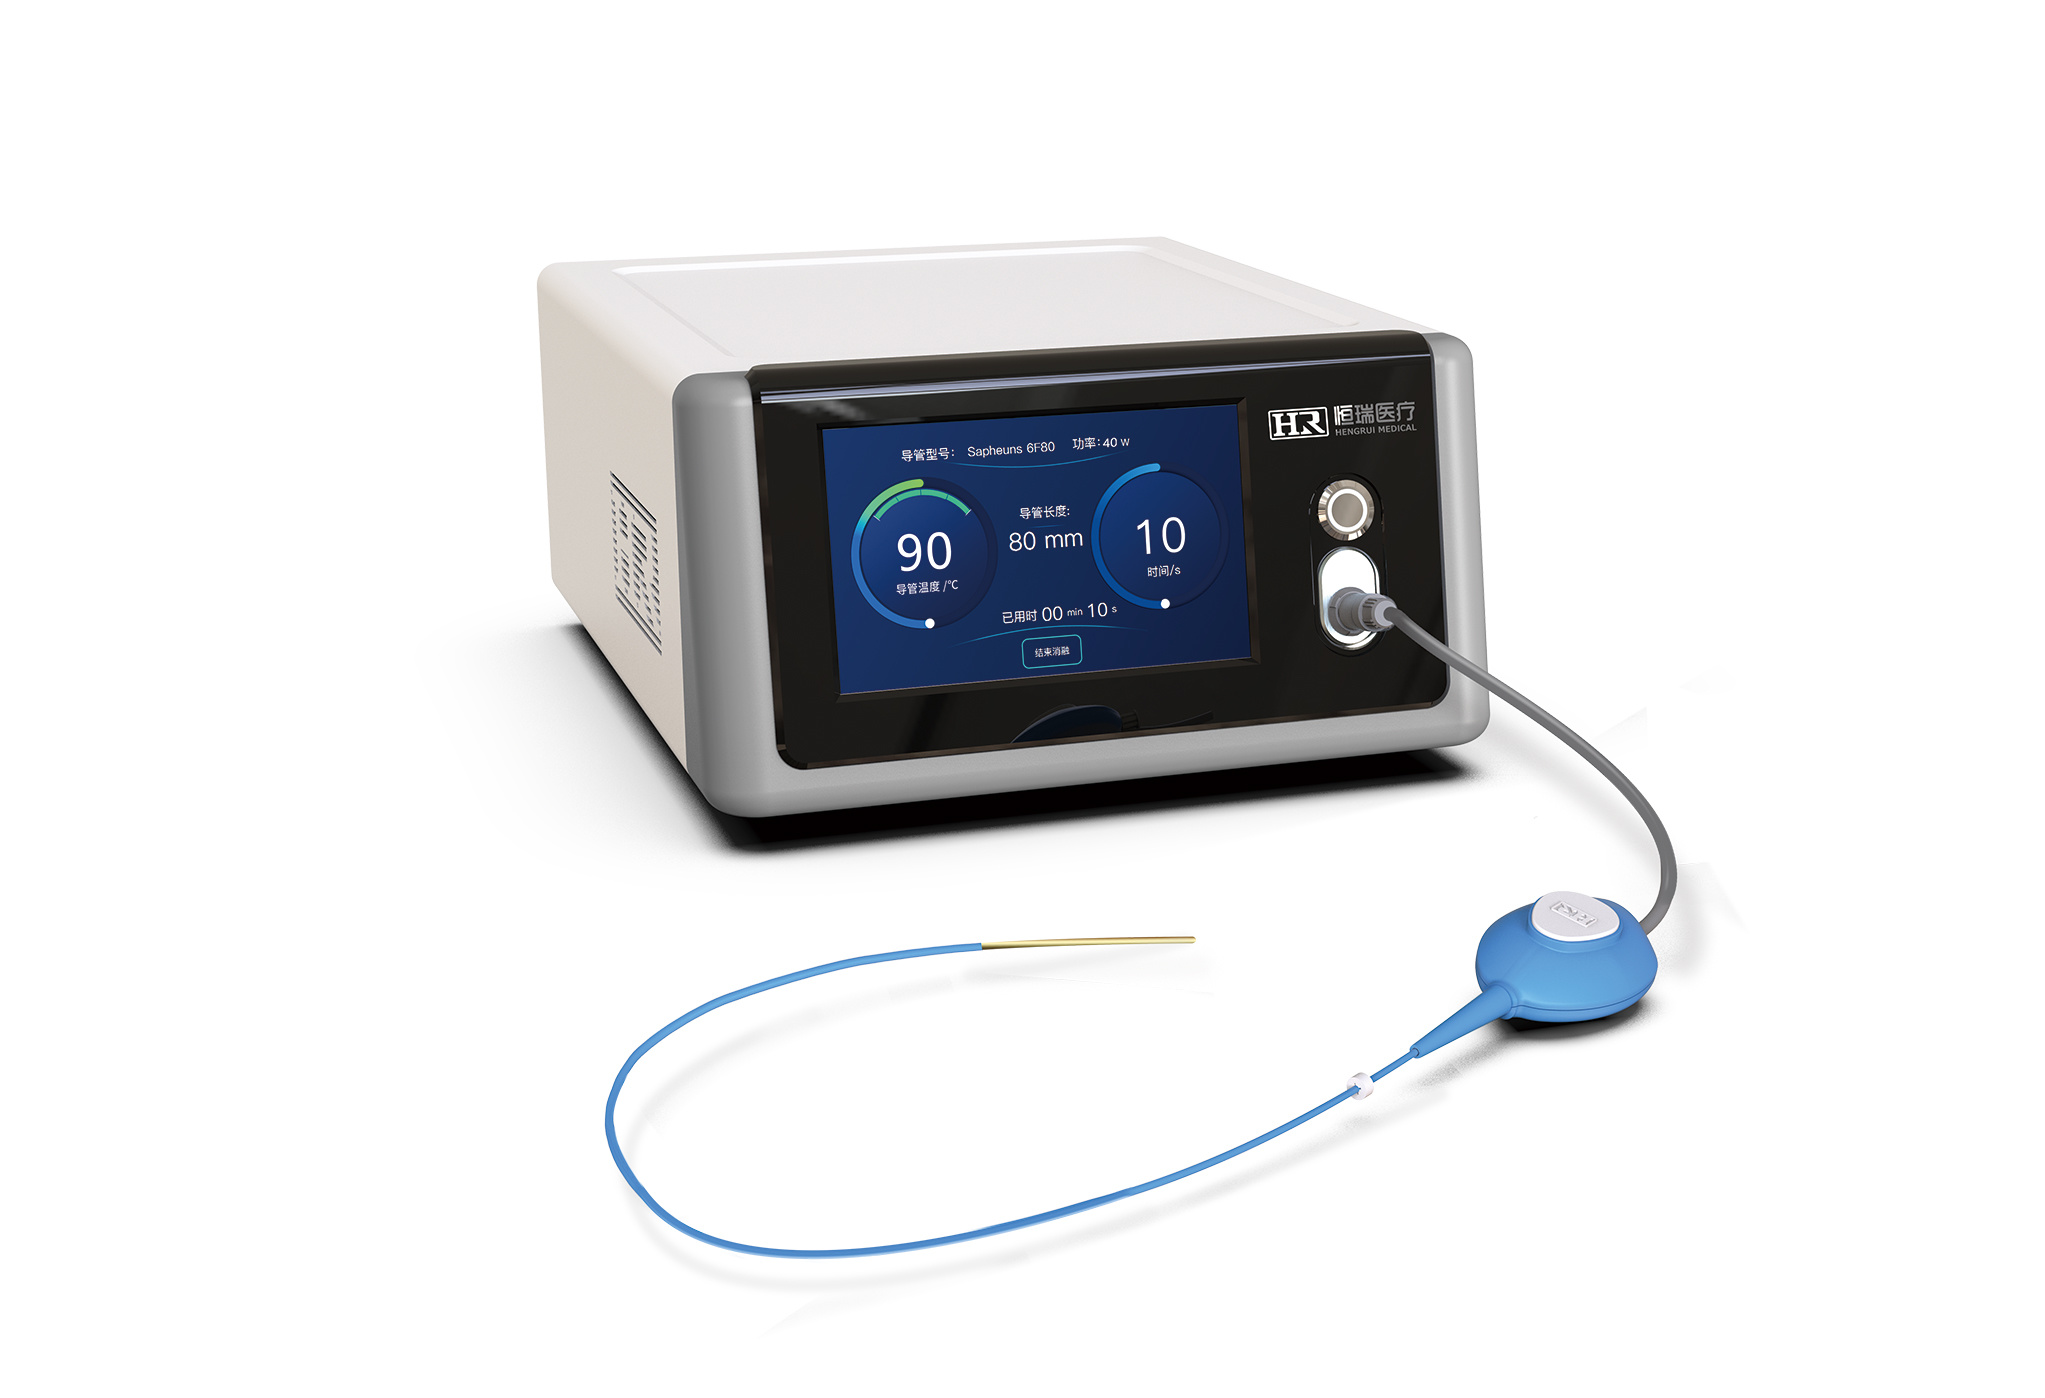 VenousRF Endovenous Radiofrequency Ablation System